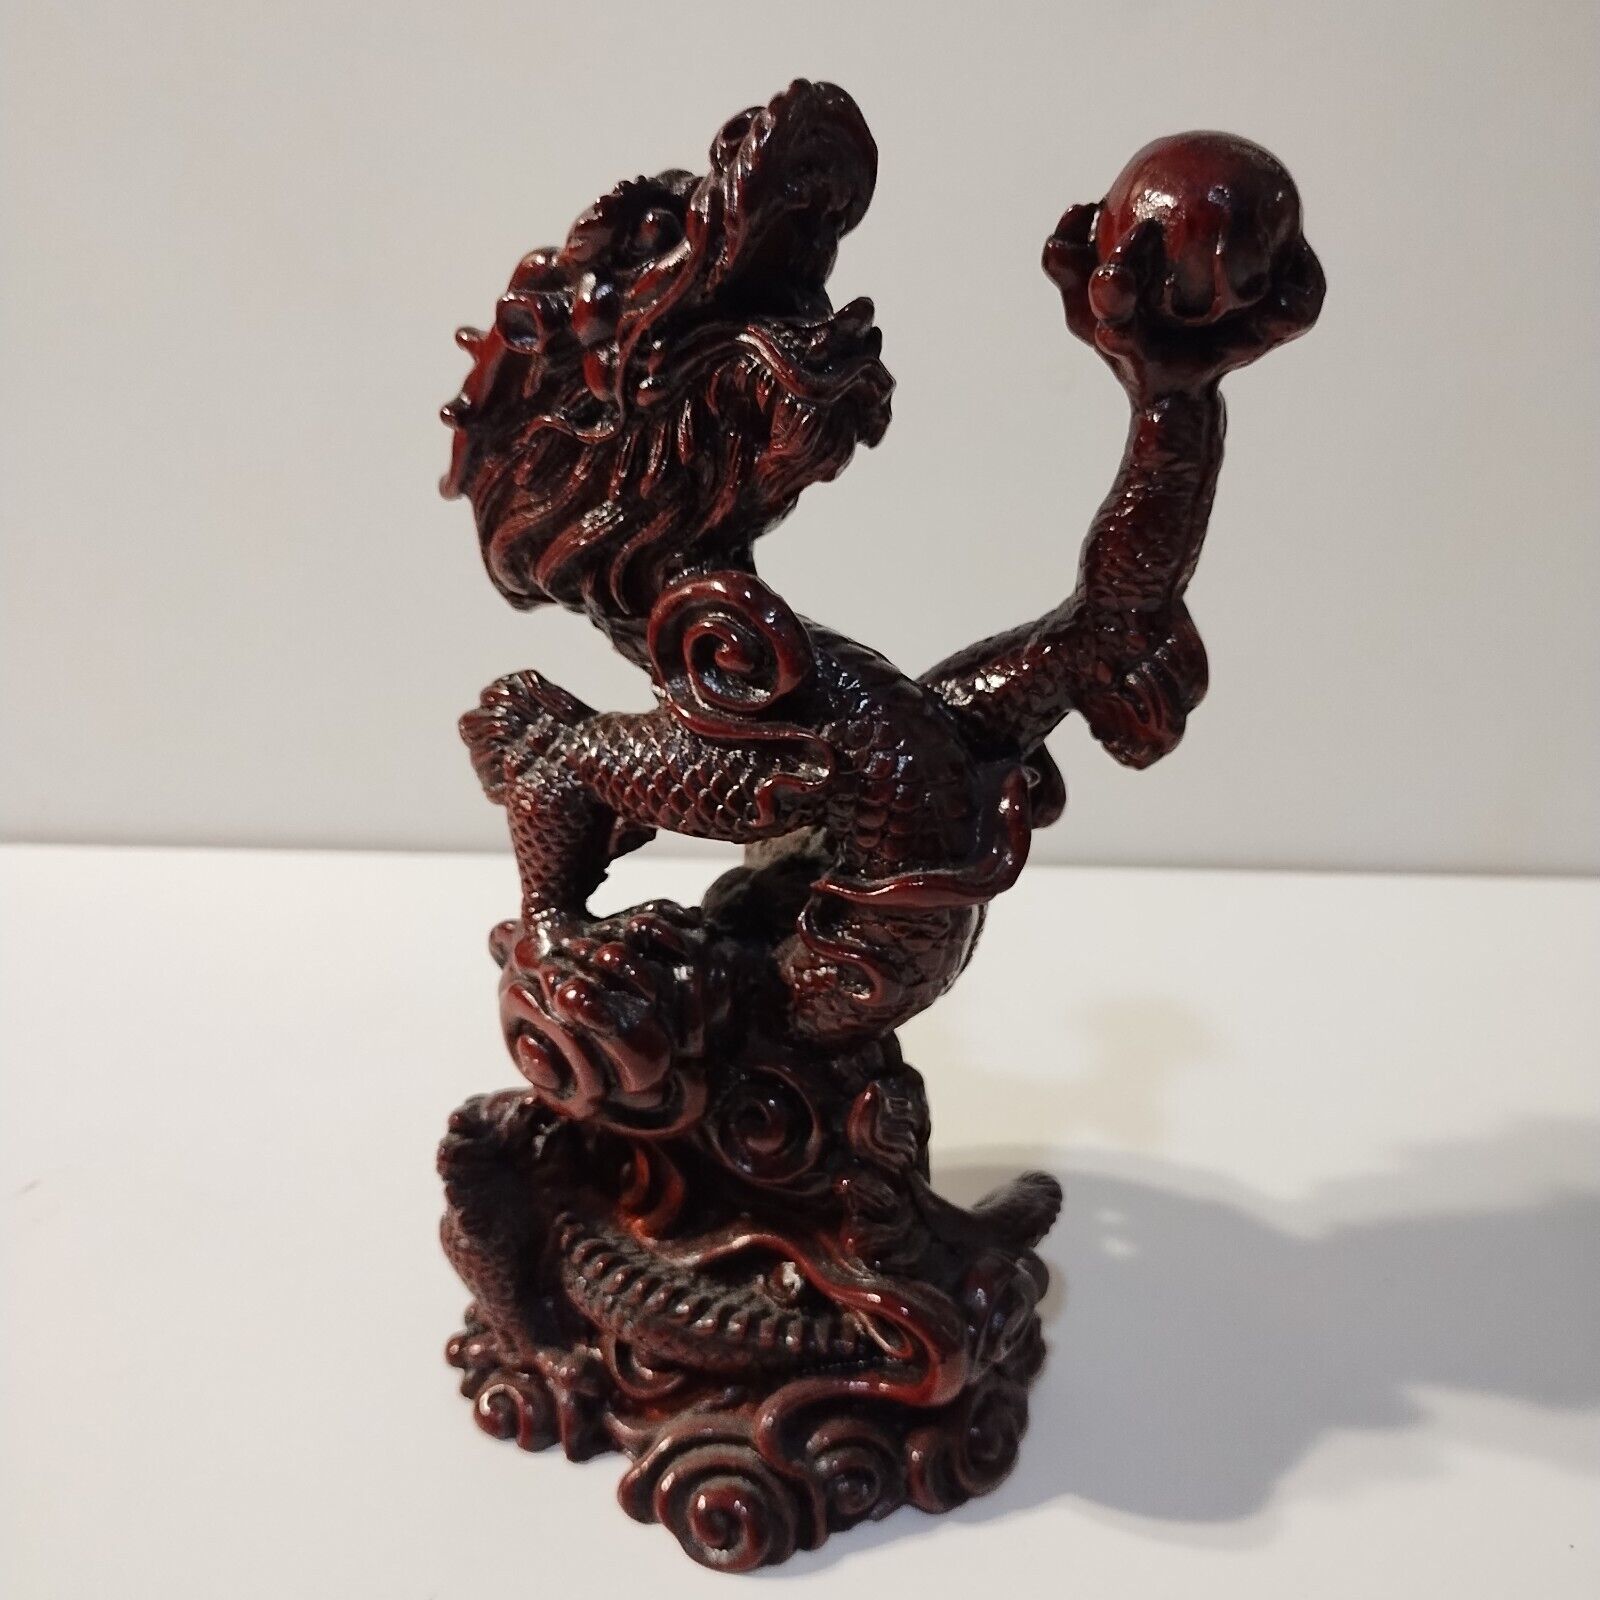 Dragon Statue Holding Orb Resin 8 inches tall